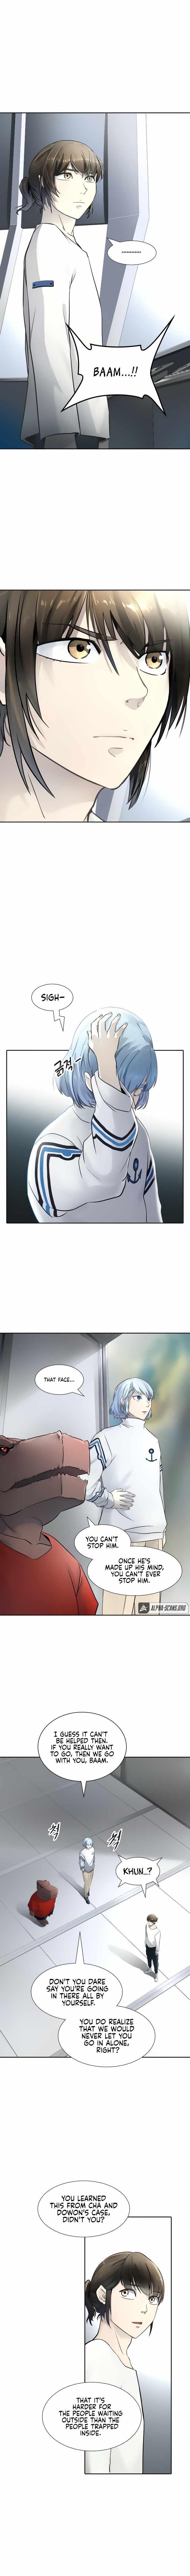 Tower of God Chapter 516 - Page 6